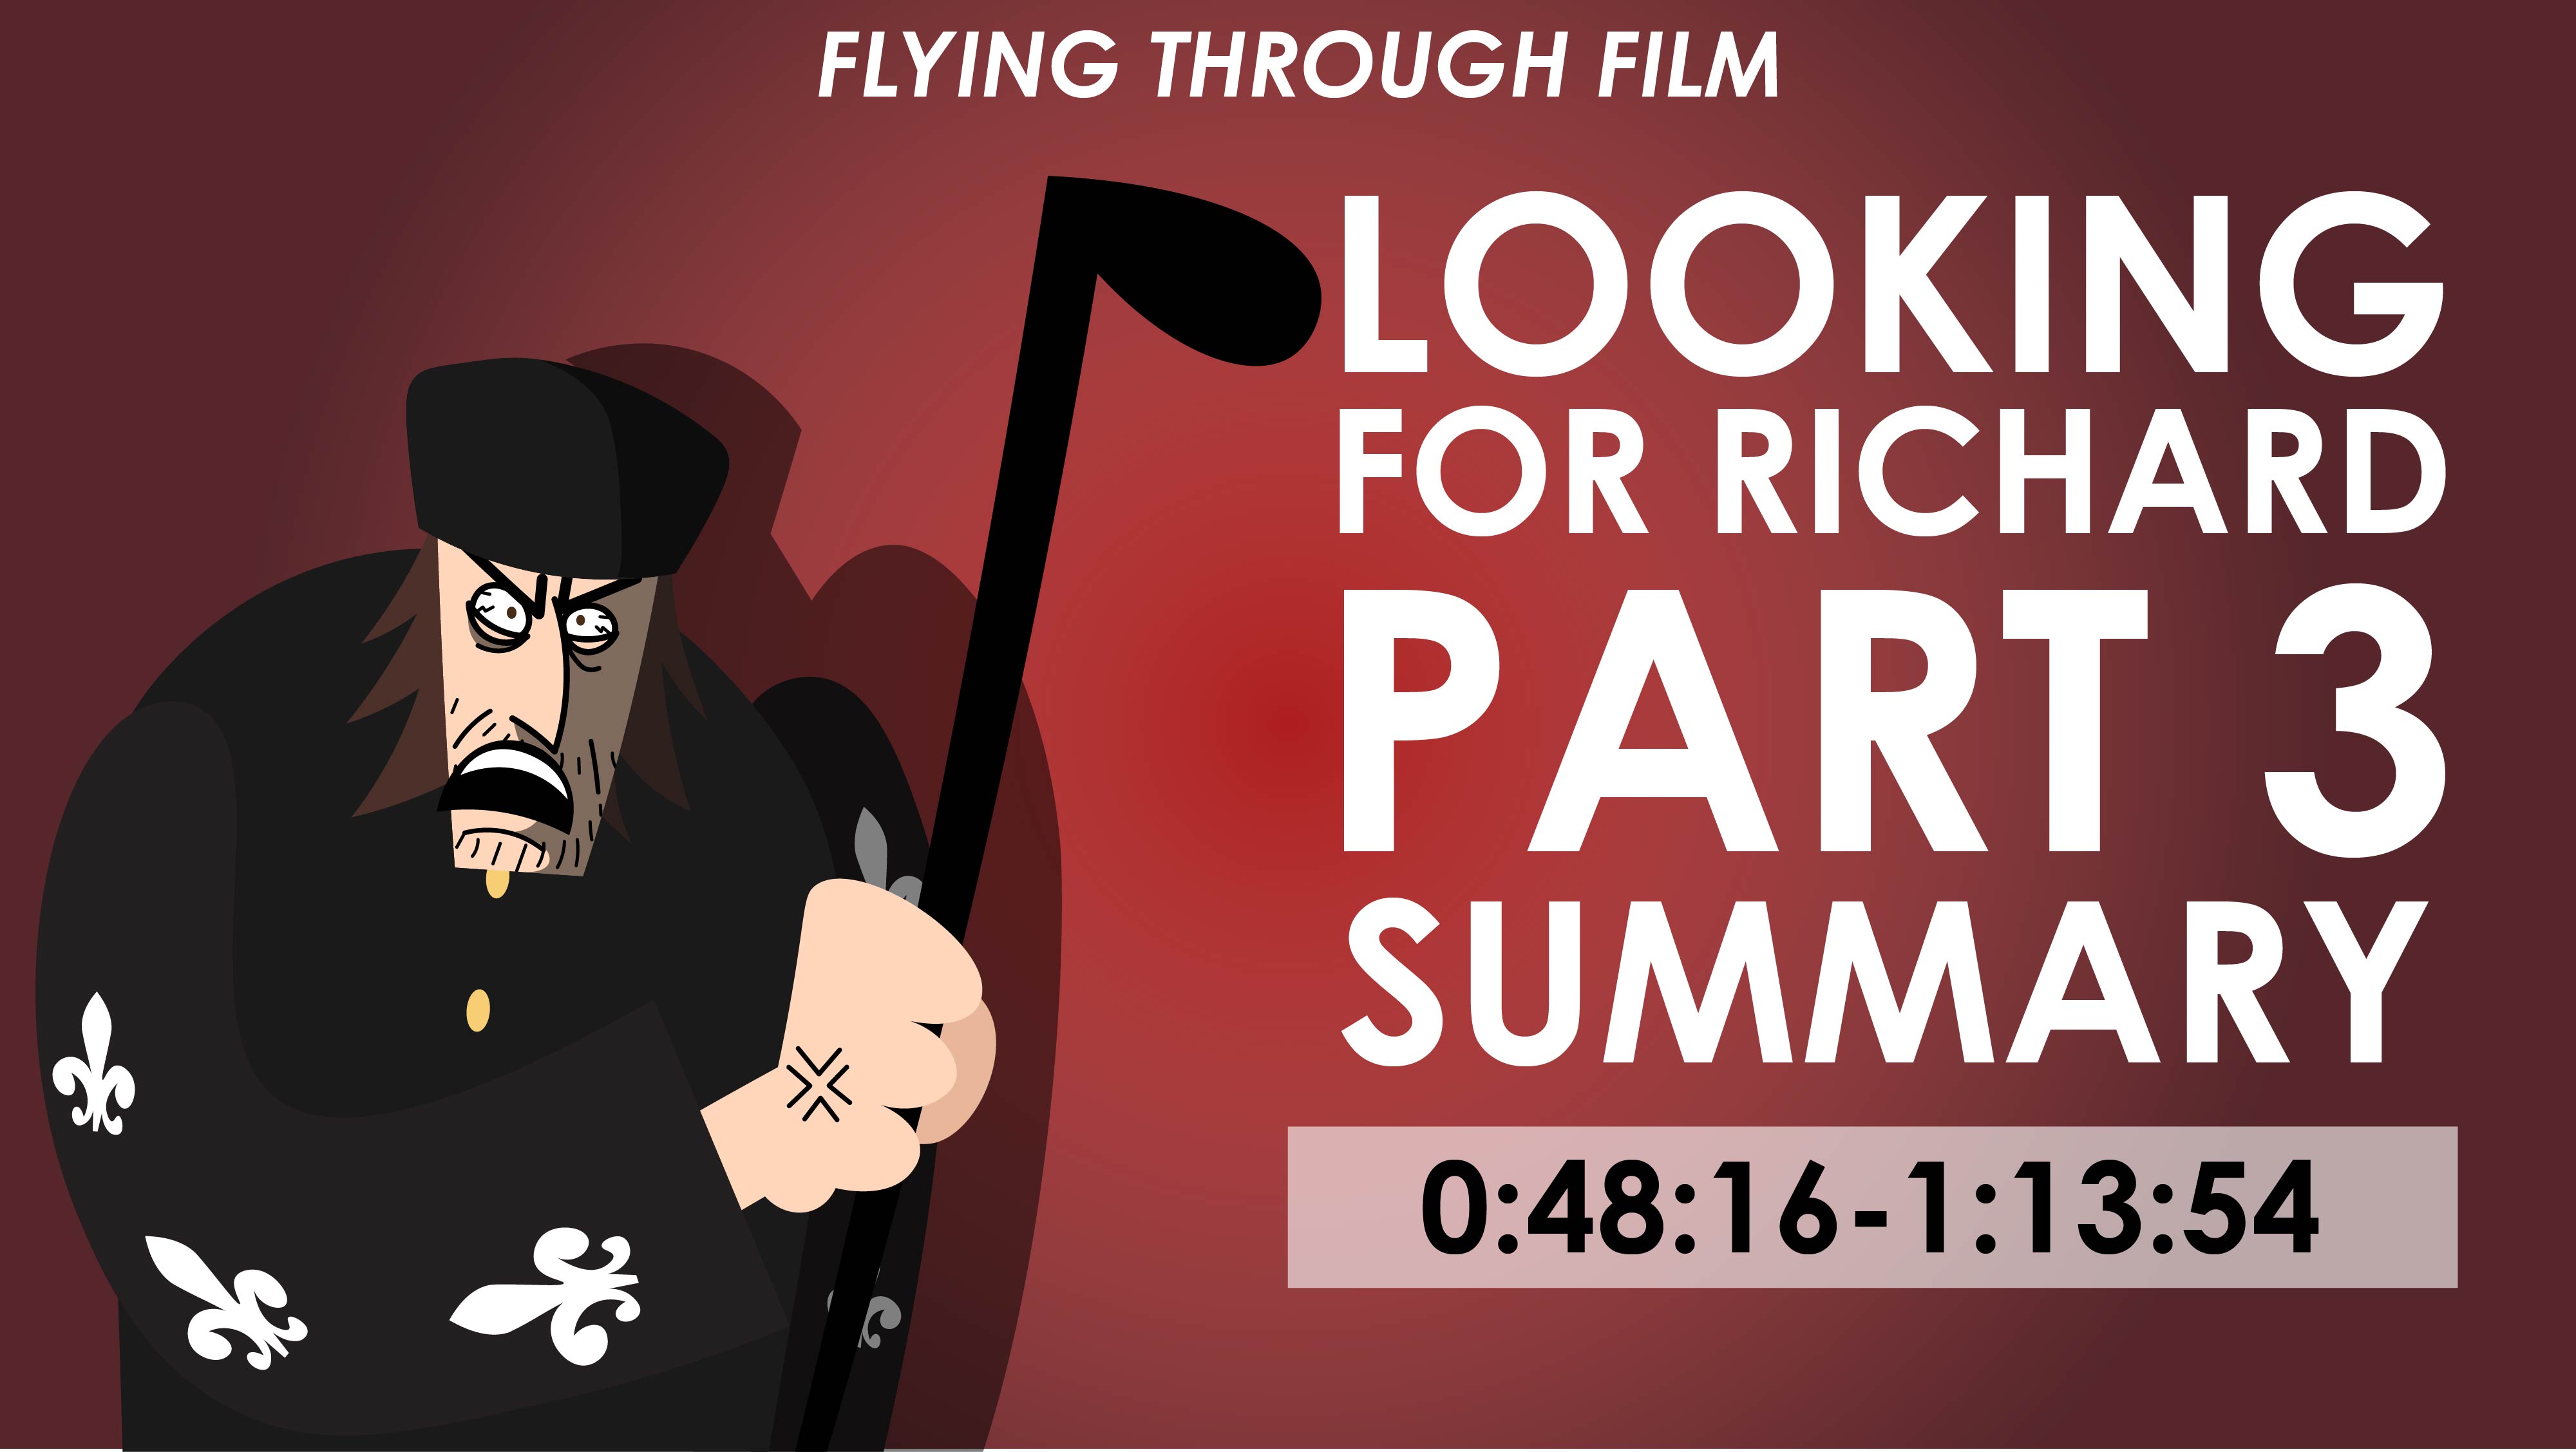 Looking For Richard - Part 3 Summary (0:48:16 - 1:13:54)- Flying Through Film Series